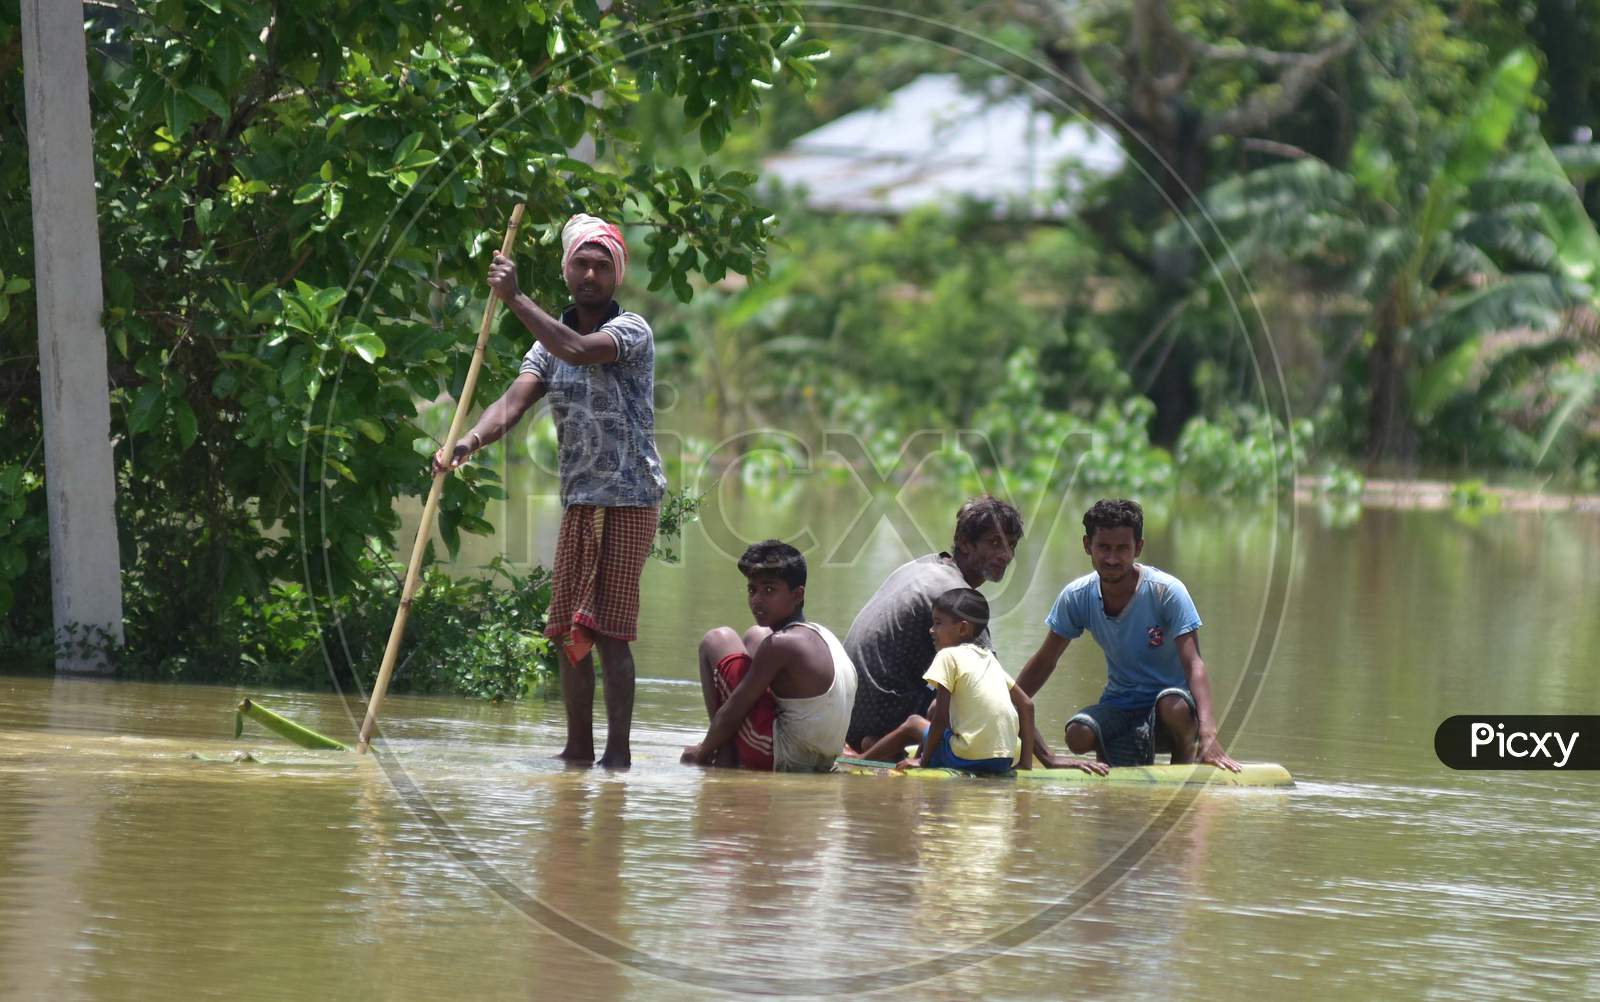 Villagers Row A Makeshift Banana Raft in Kampur In Nagaon District Of Assam On May 29,2020.